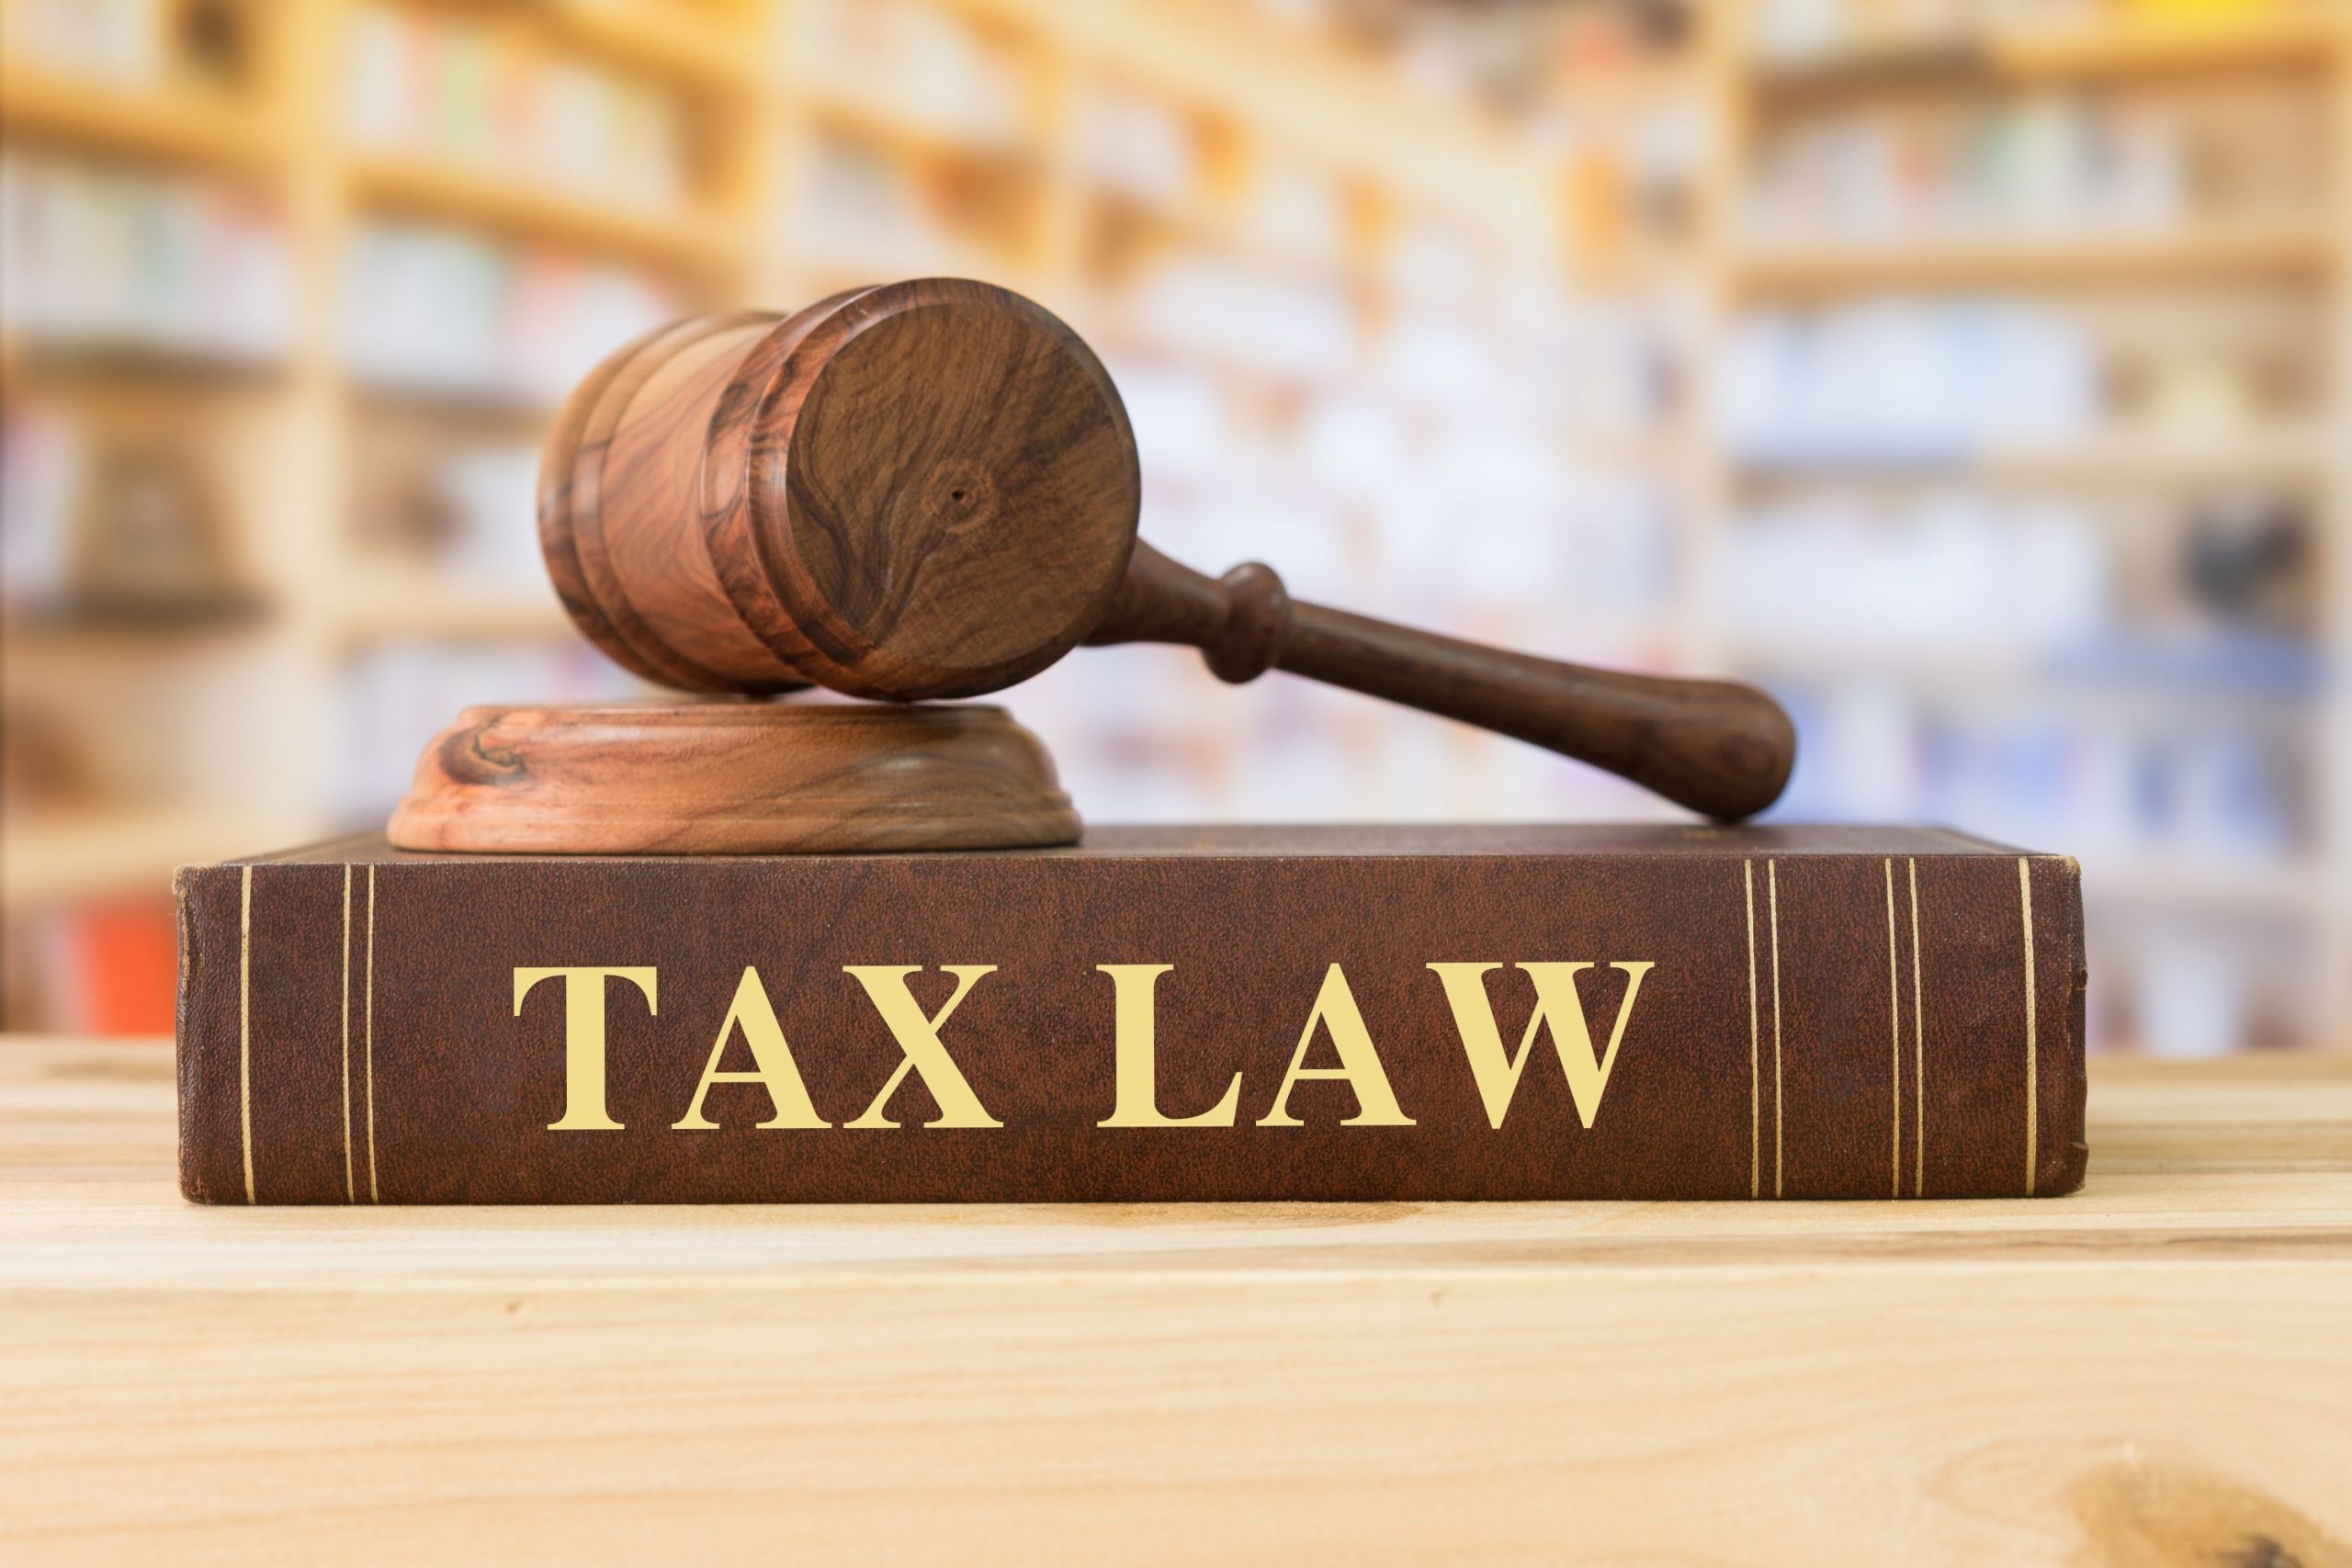 Various tax laws and how to apply for Federal tax ID number in the United States